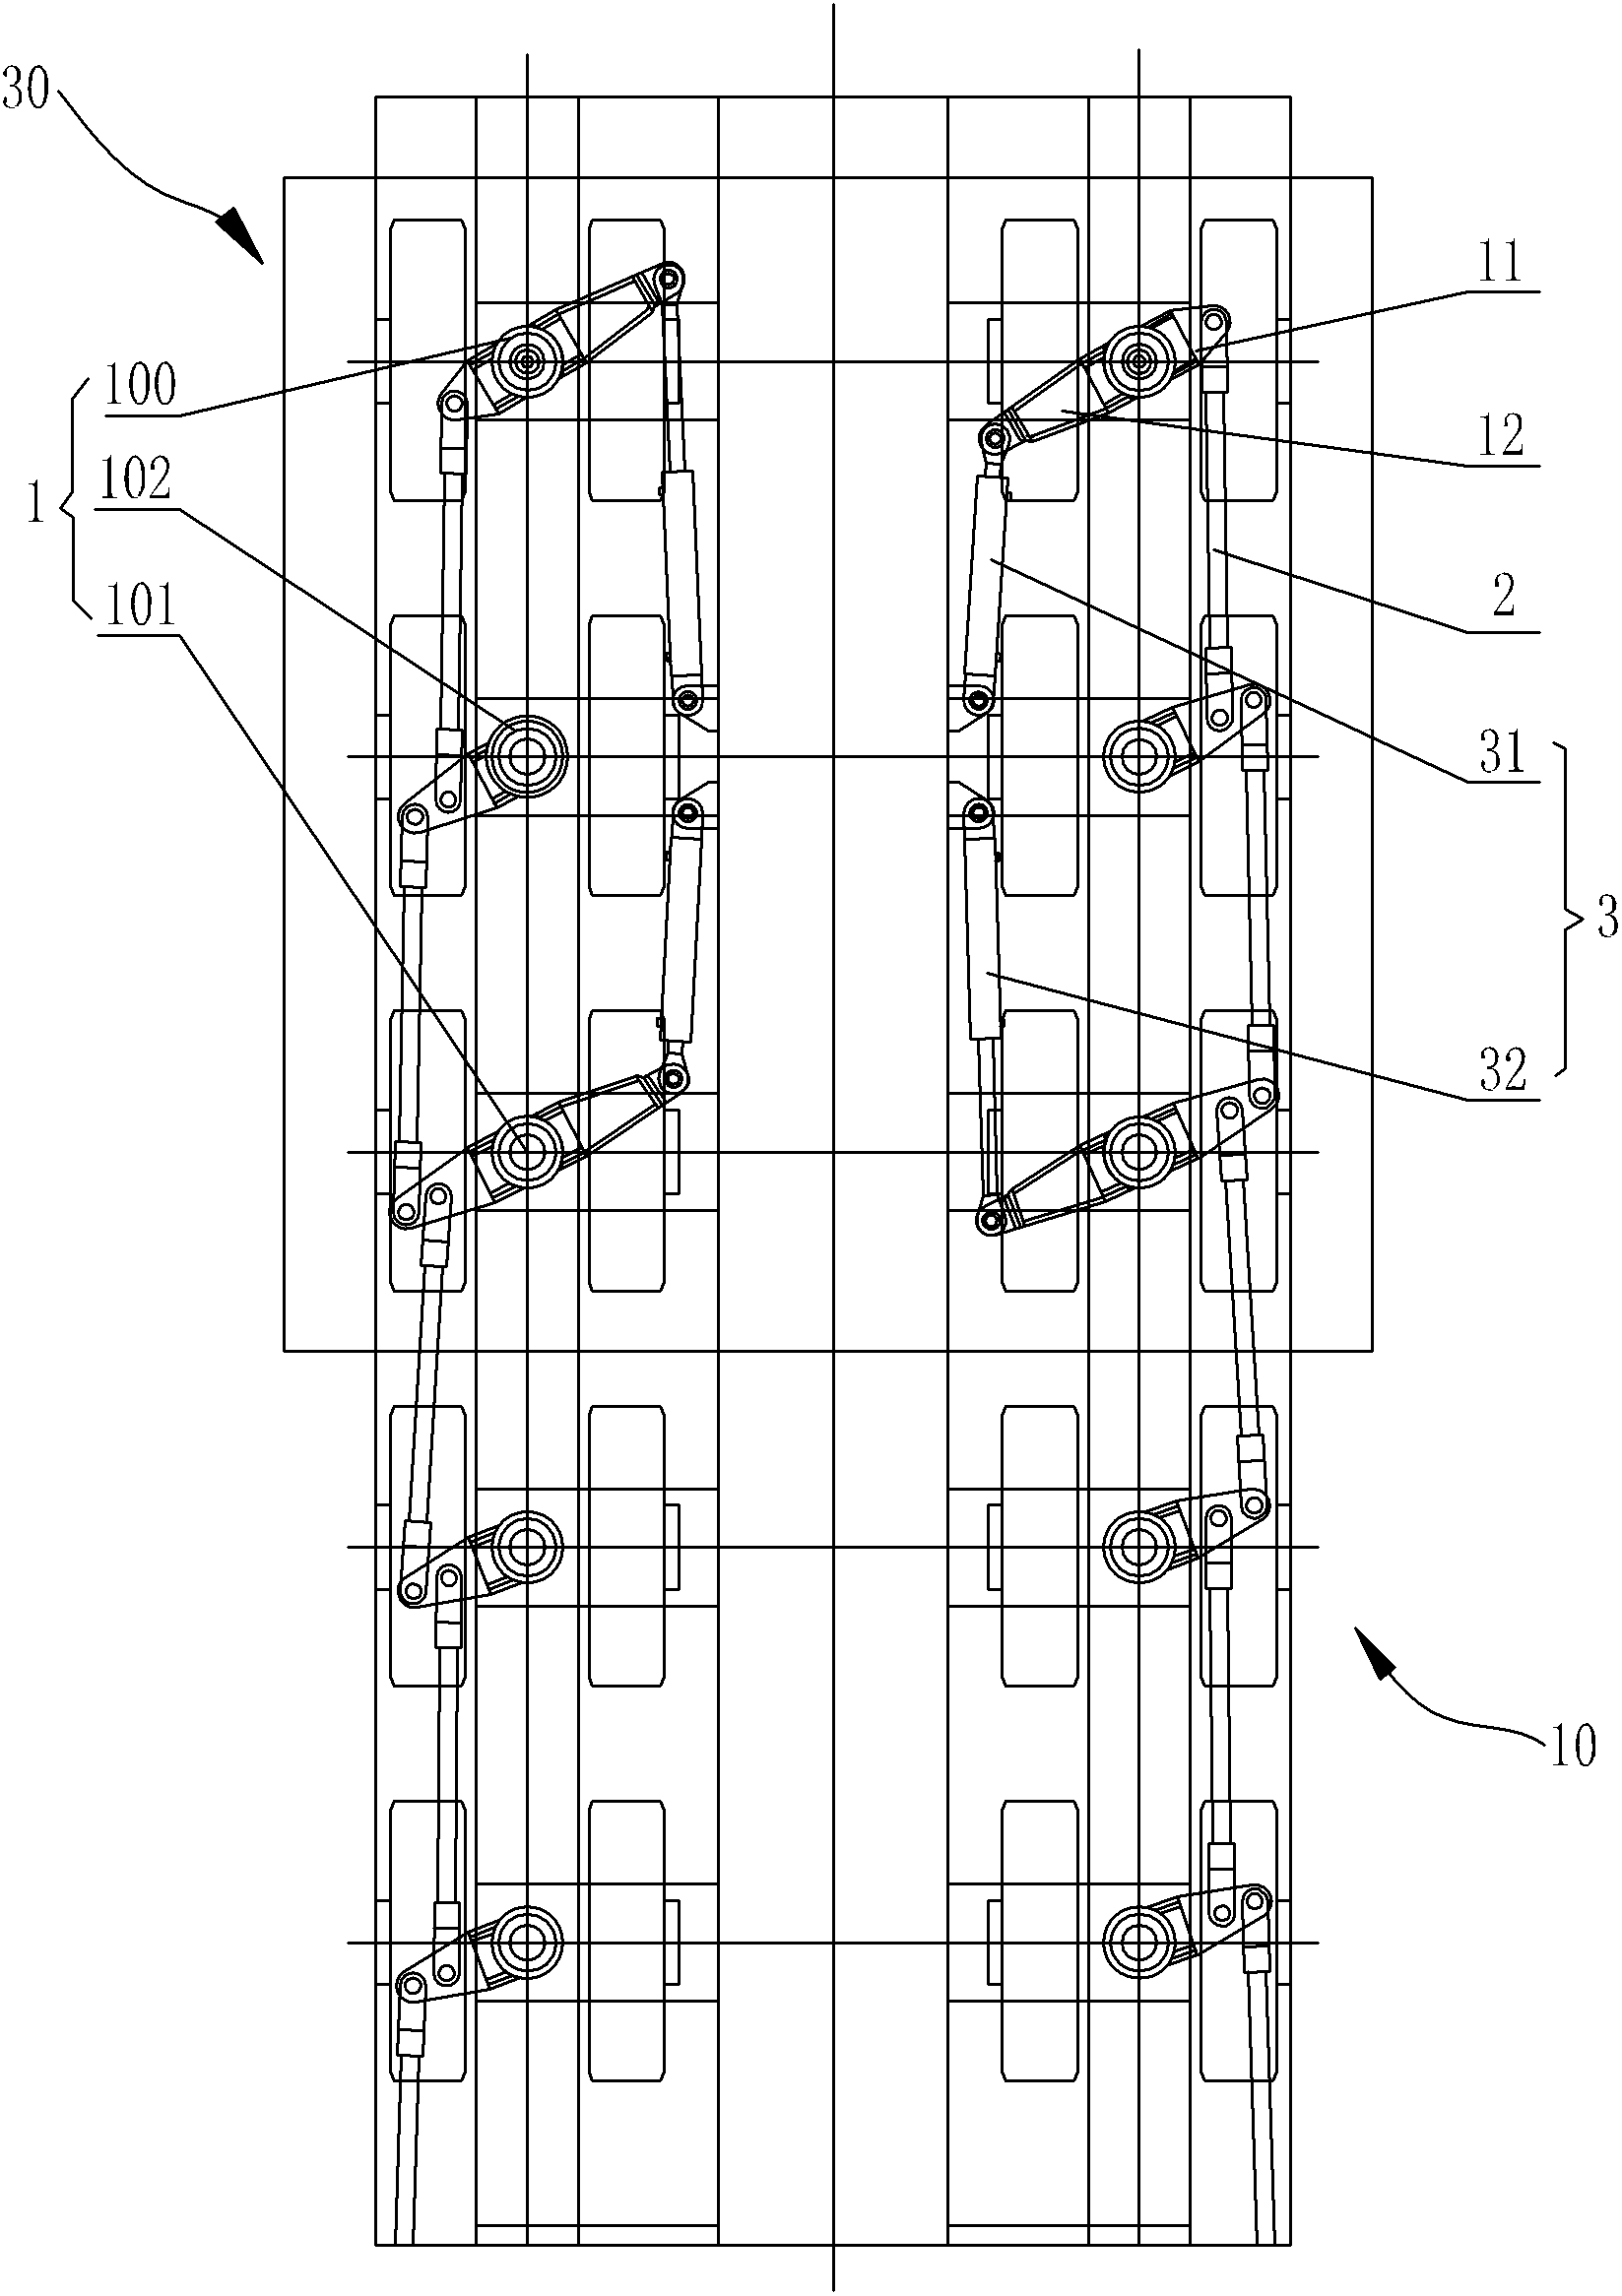 Multi-axle dispersed power steering system for load-carrying vehicle